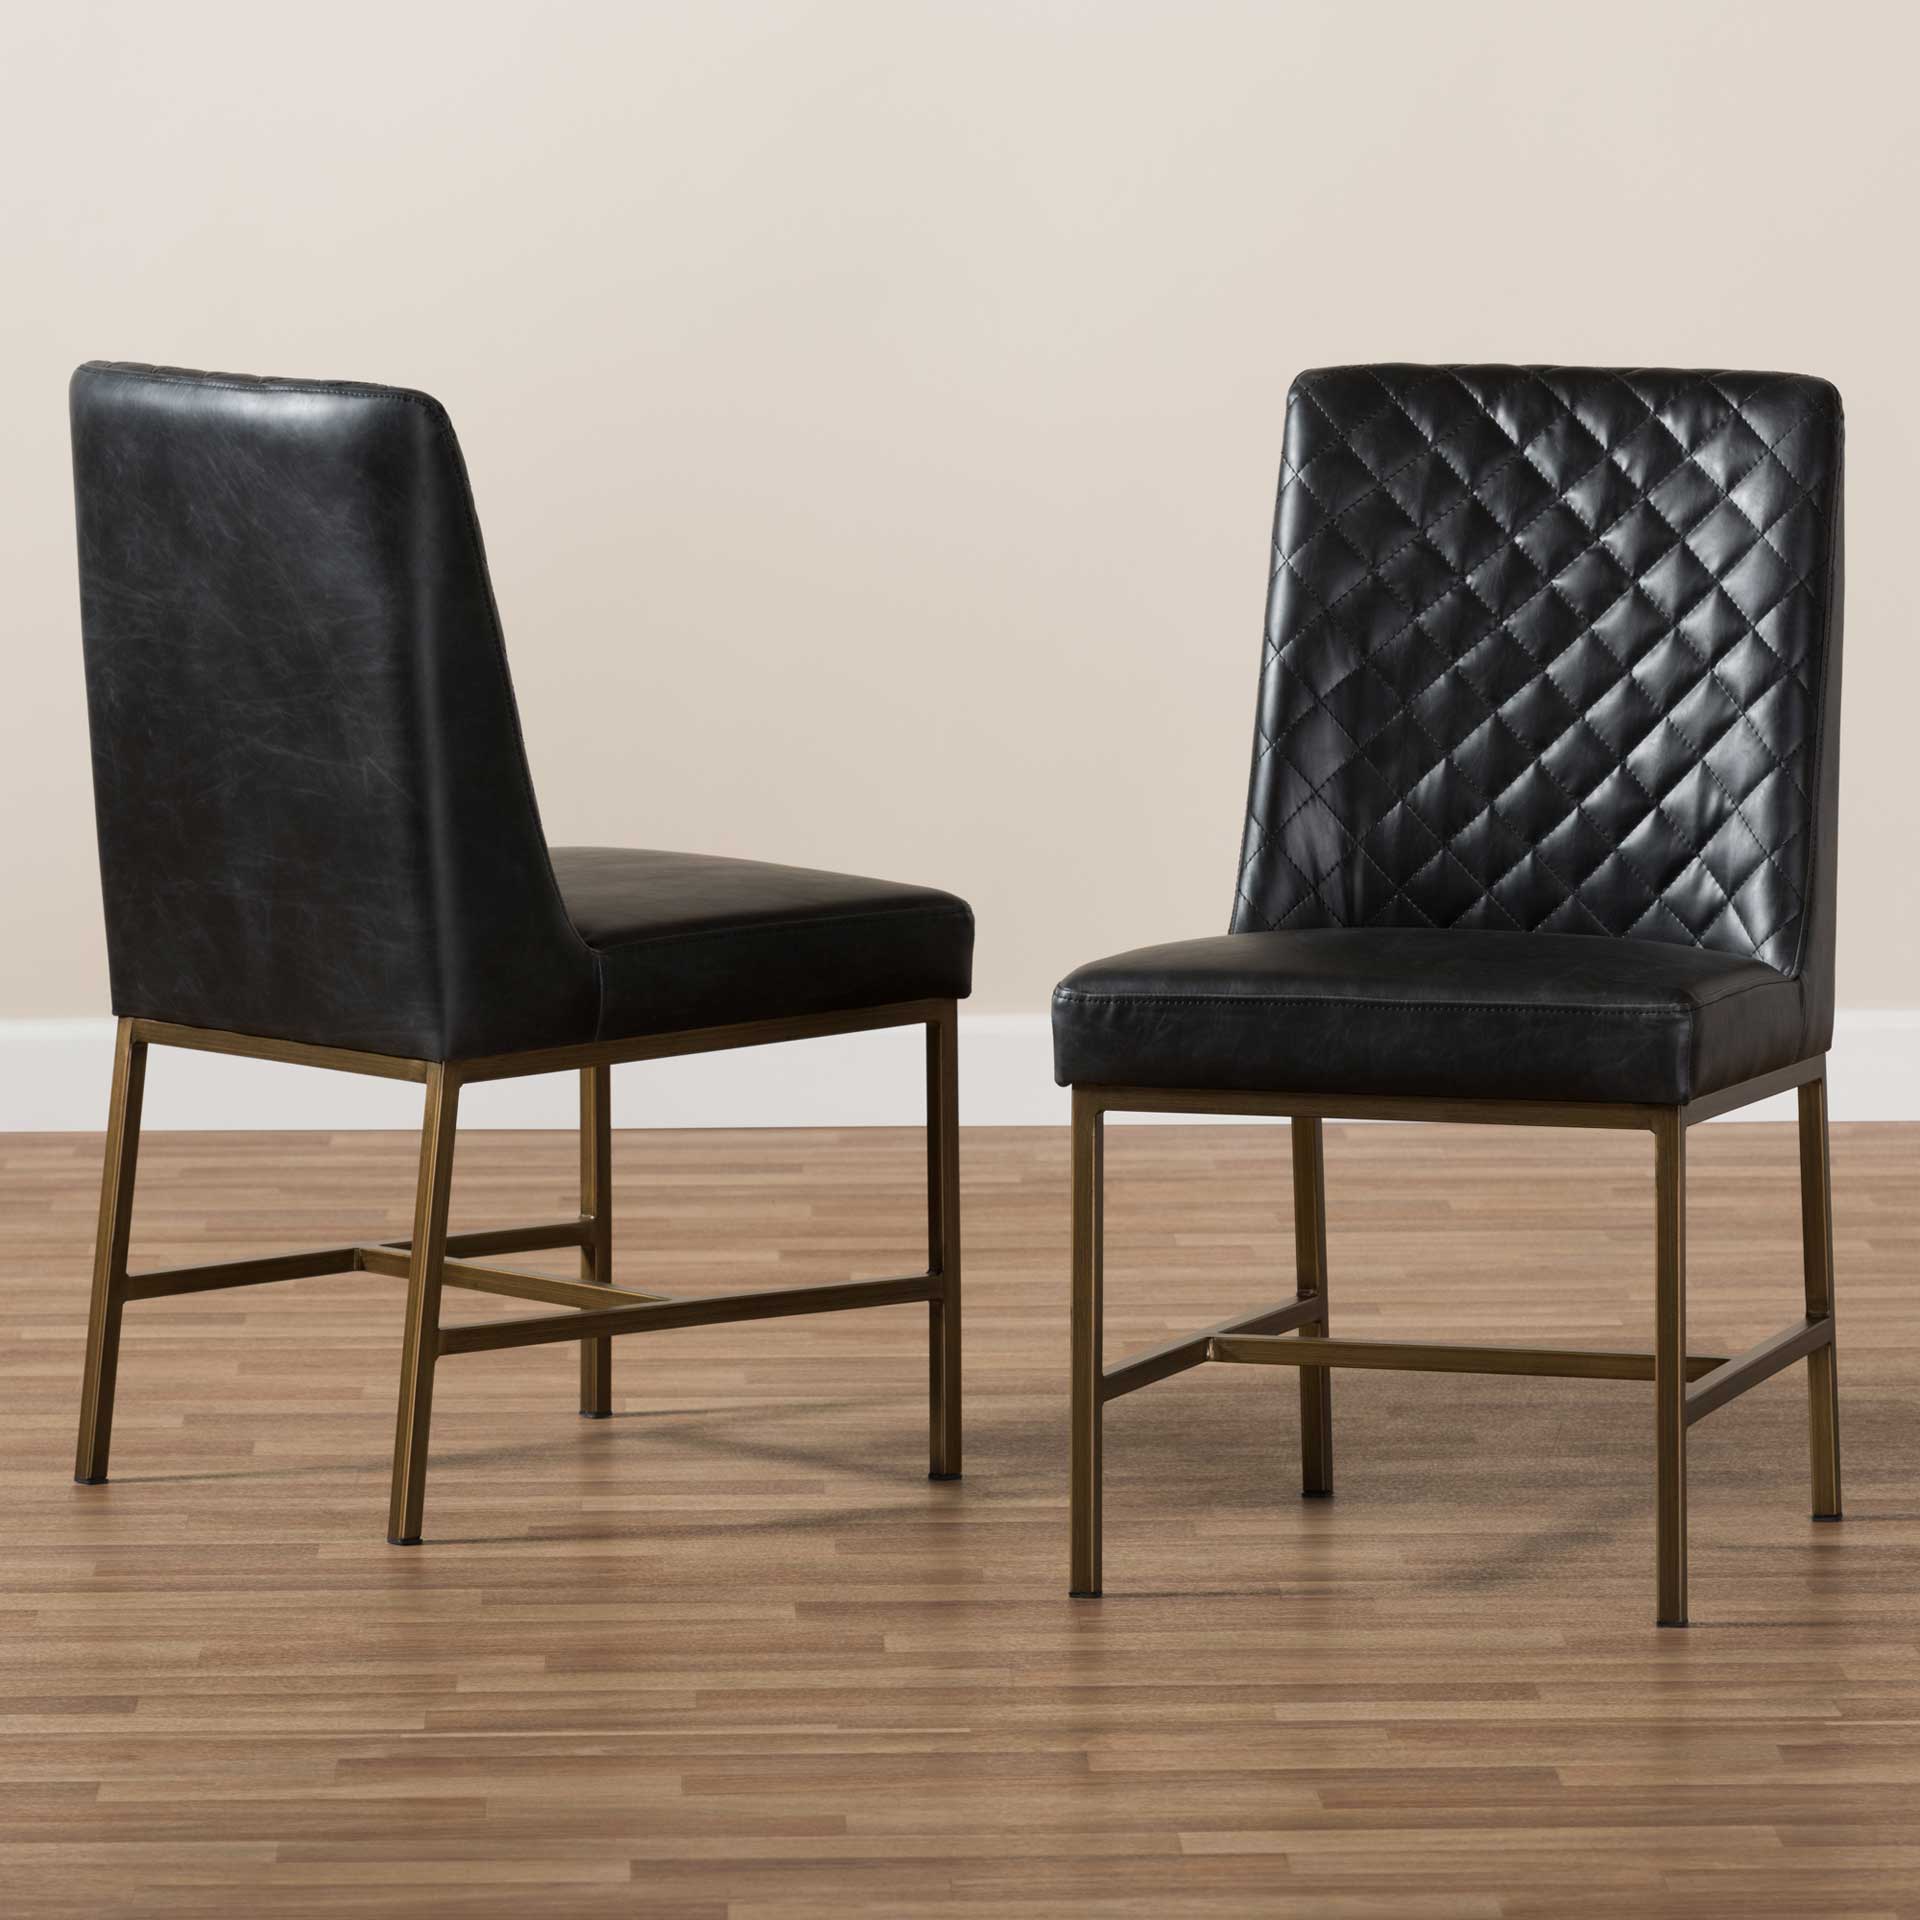 Mabelle Faux Leather Dining Chair Black (Set of 2)